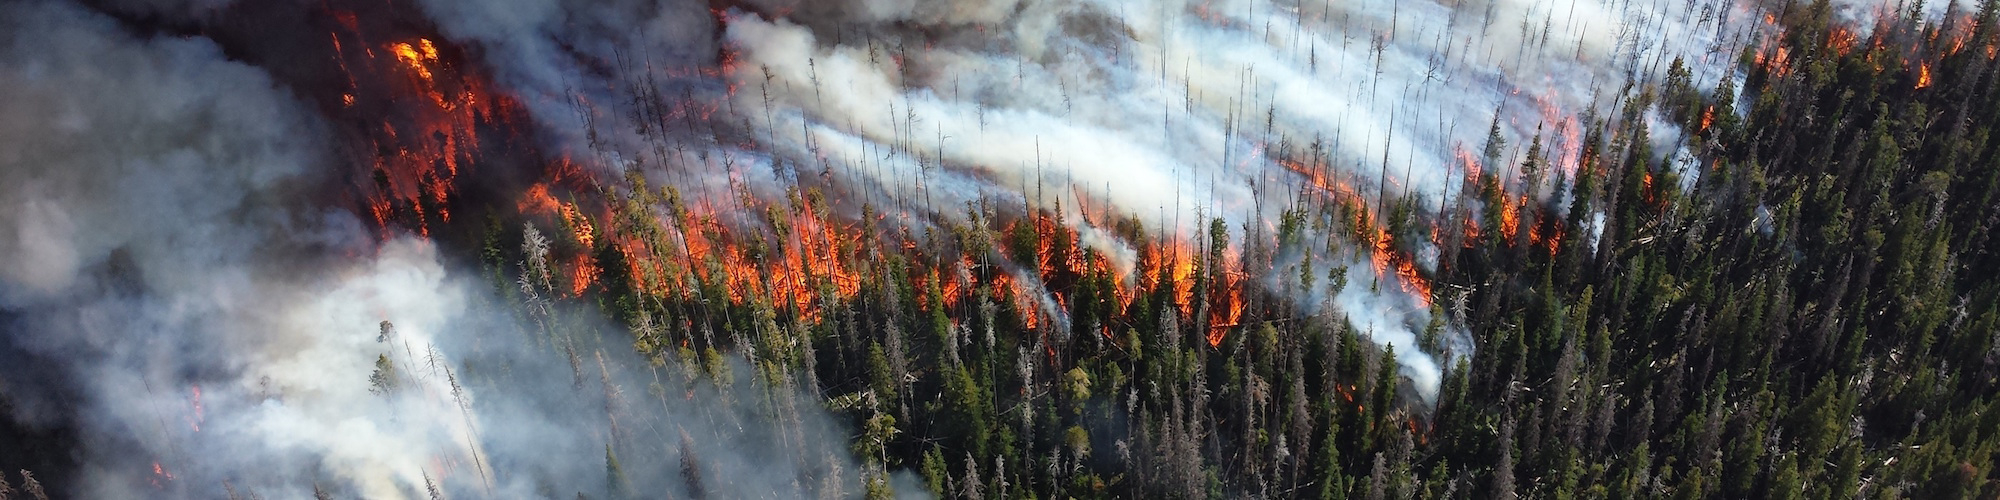 Forest Fire Image